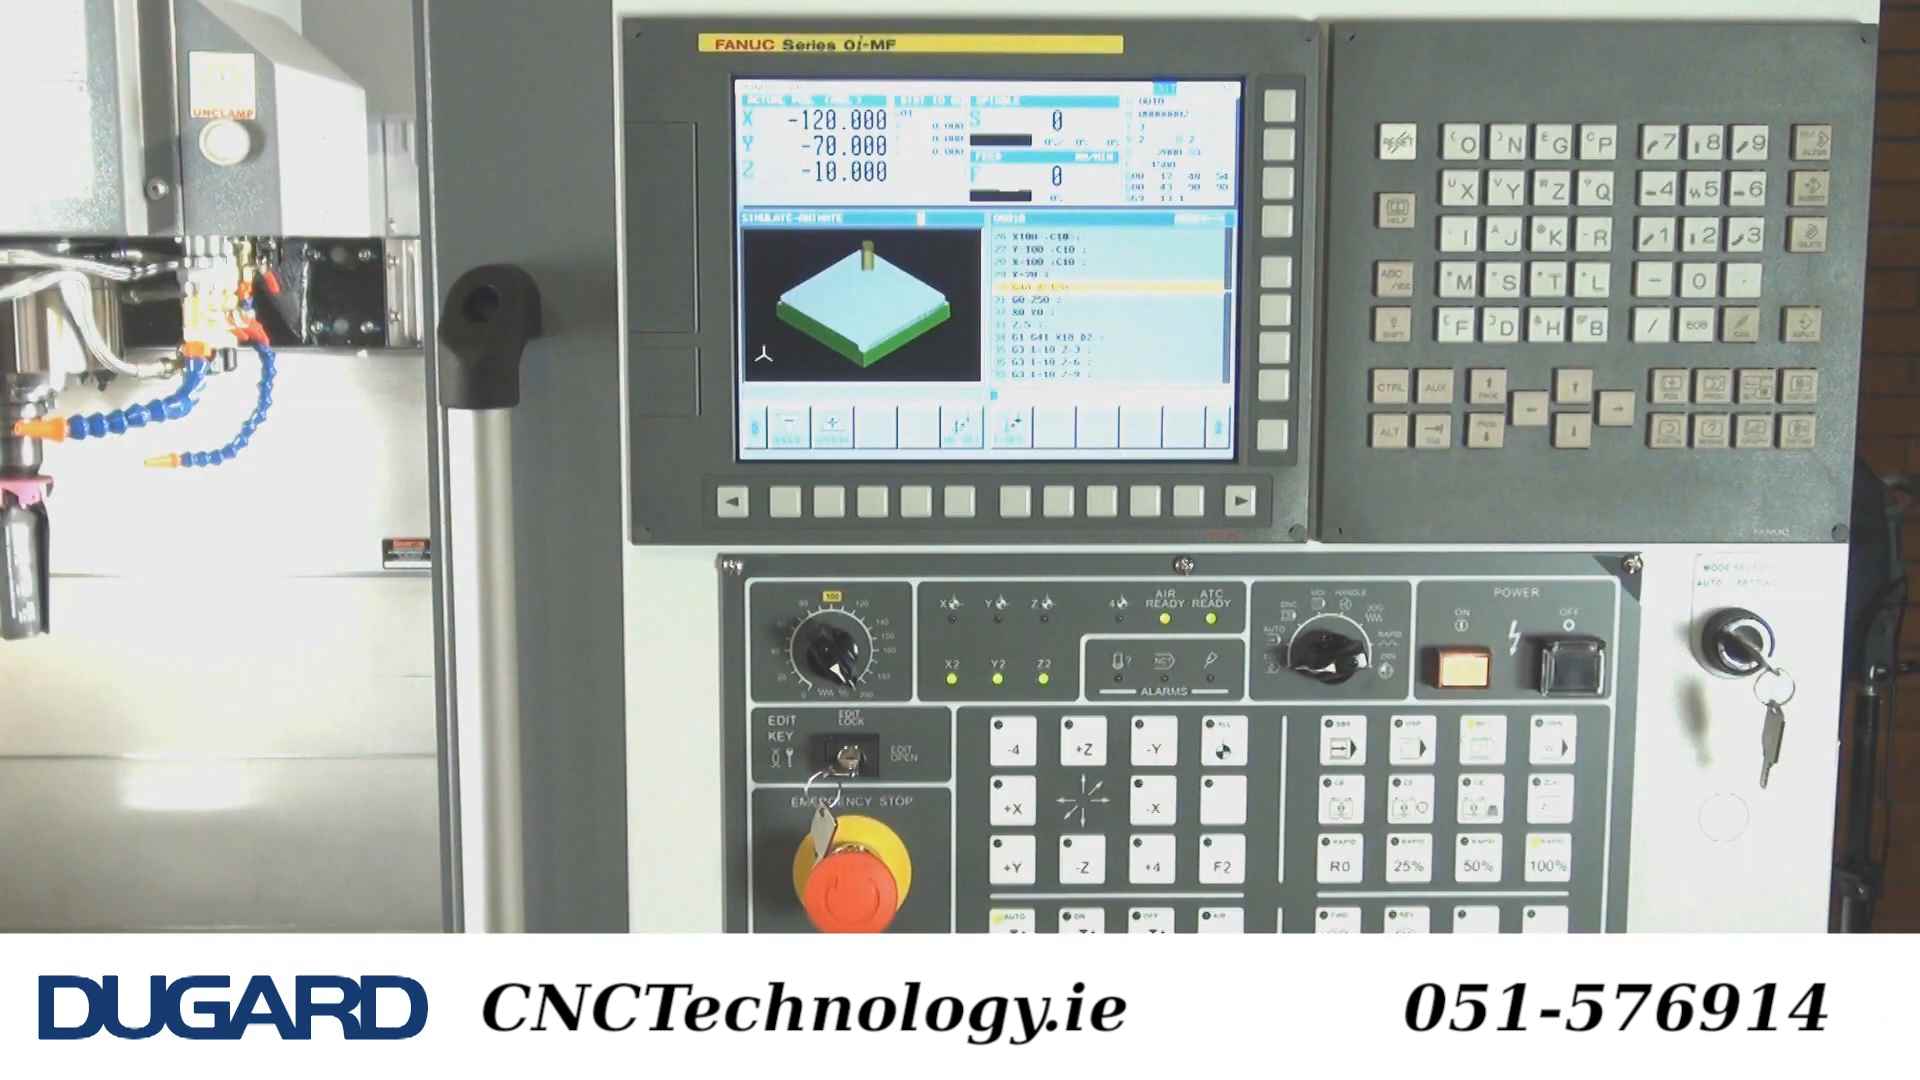 Dugard cnctechnology 2-compressed